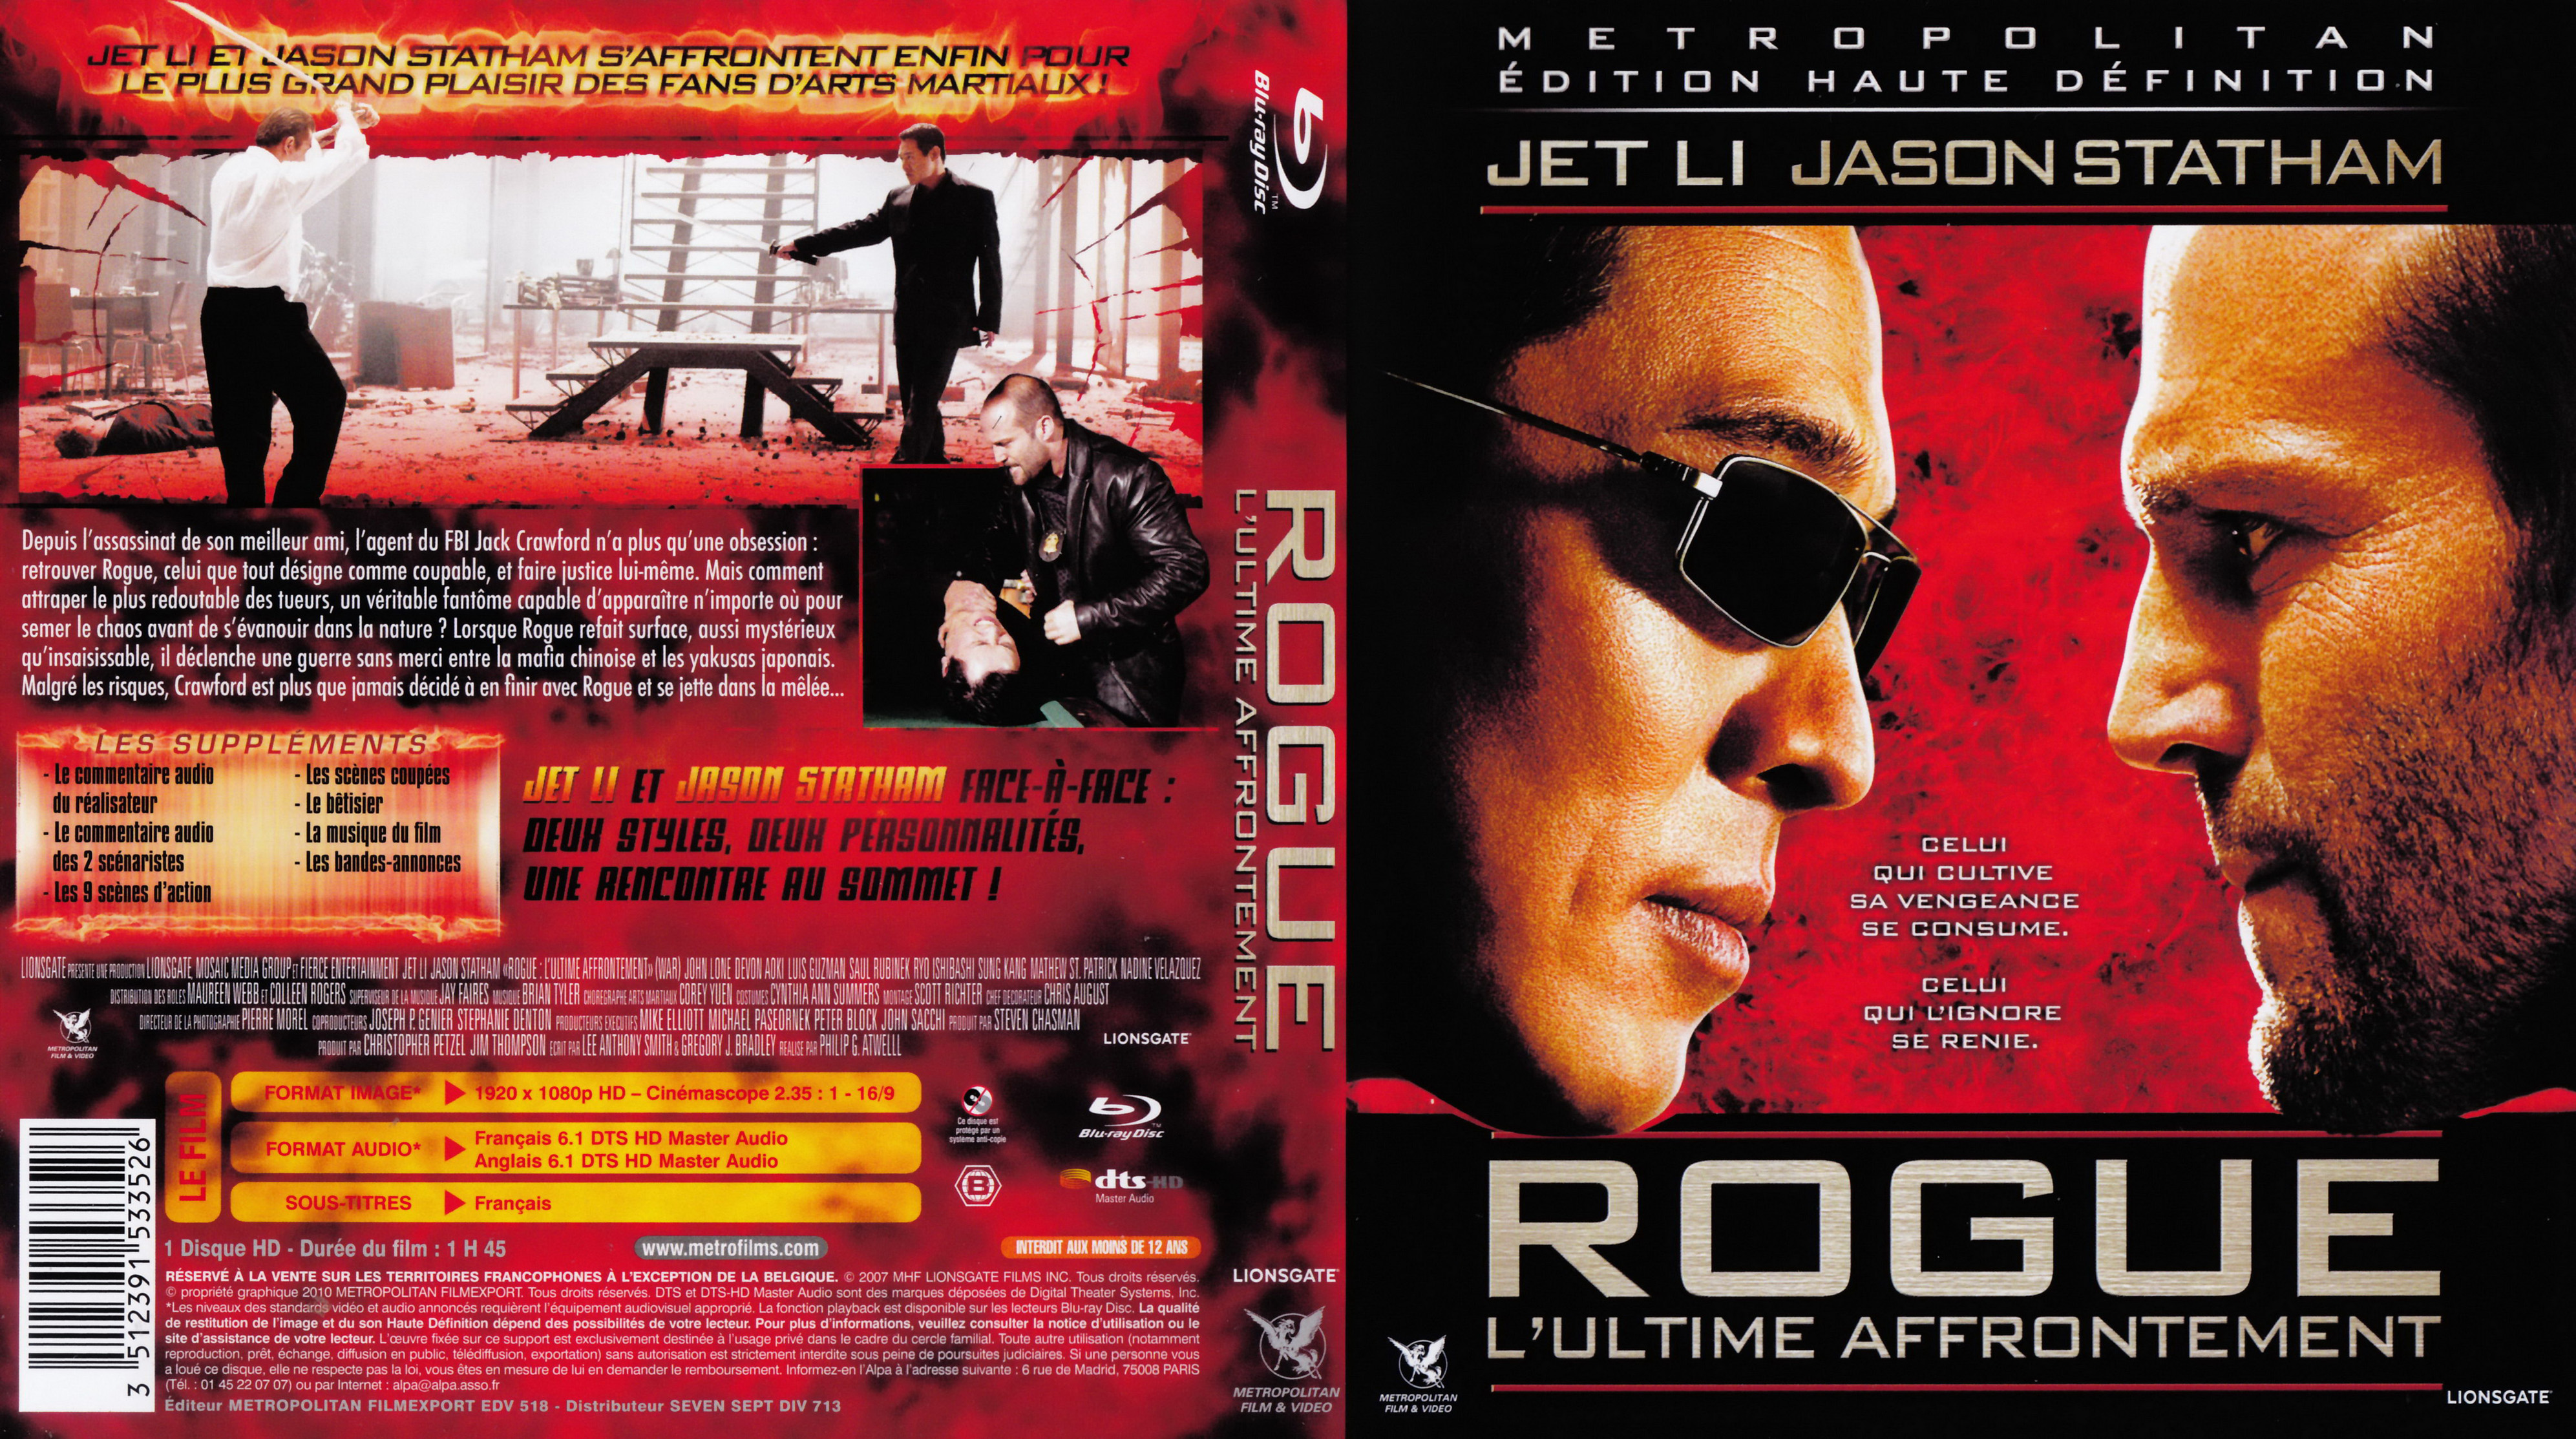 Jaquette DVD Rogue (BLU-RAY)